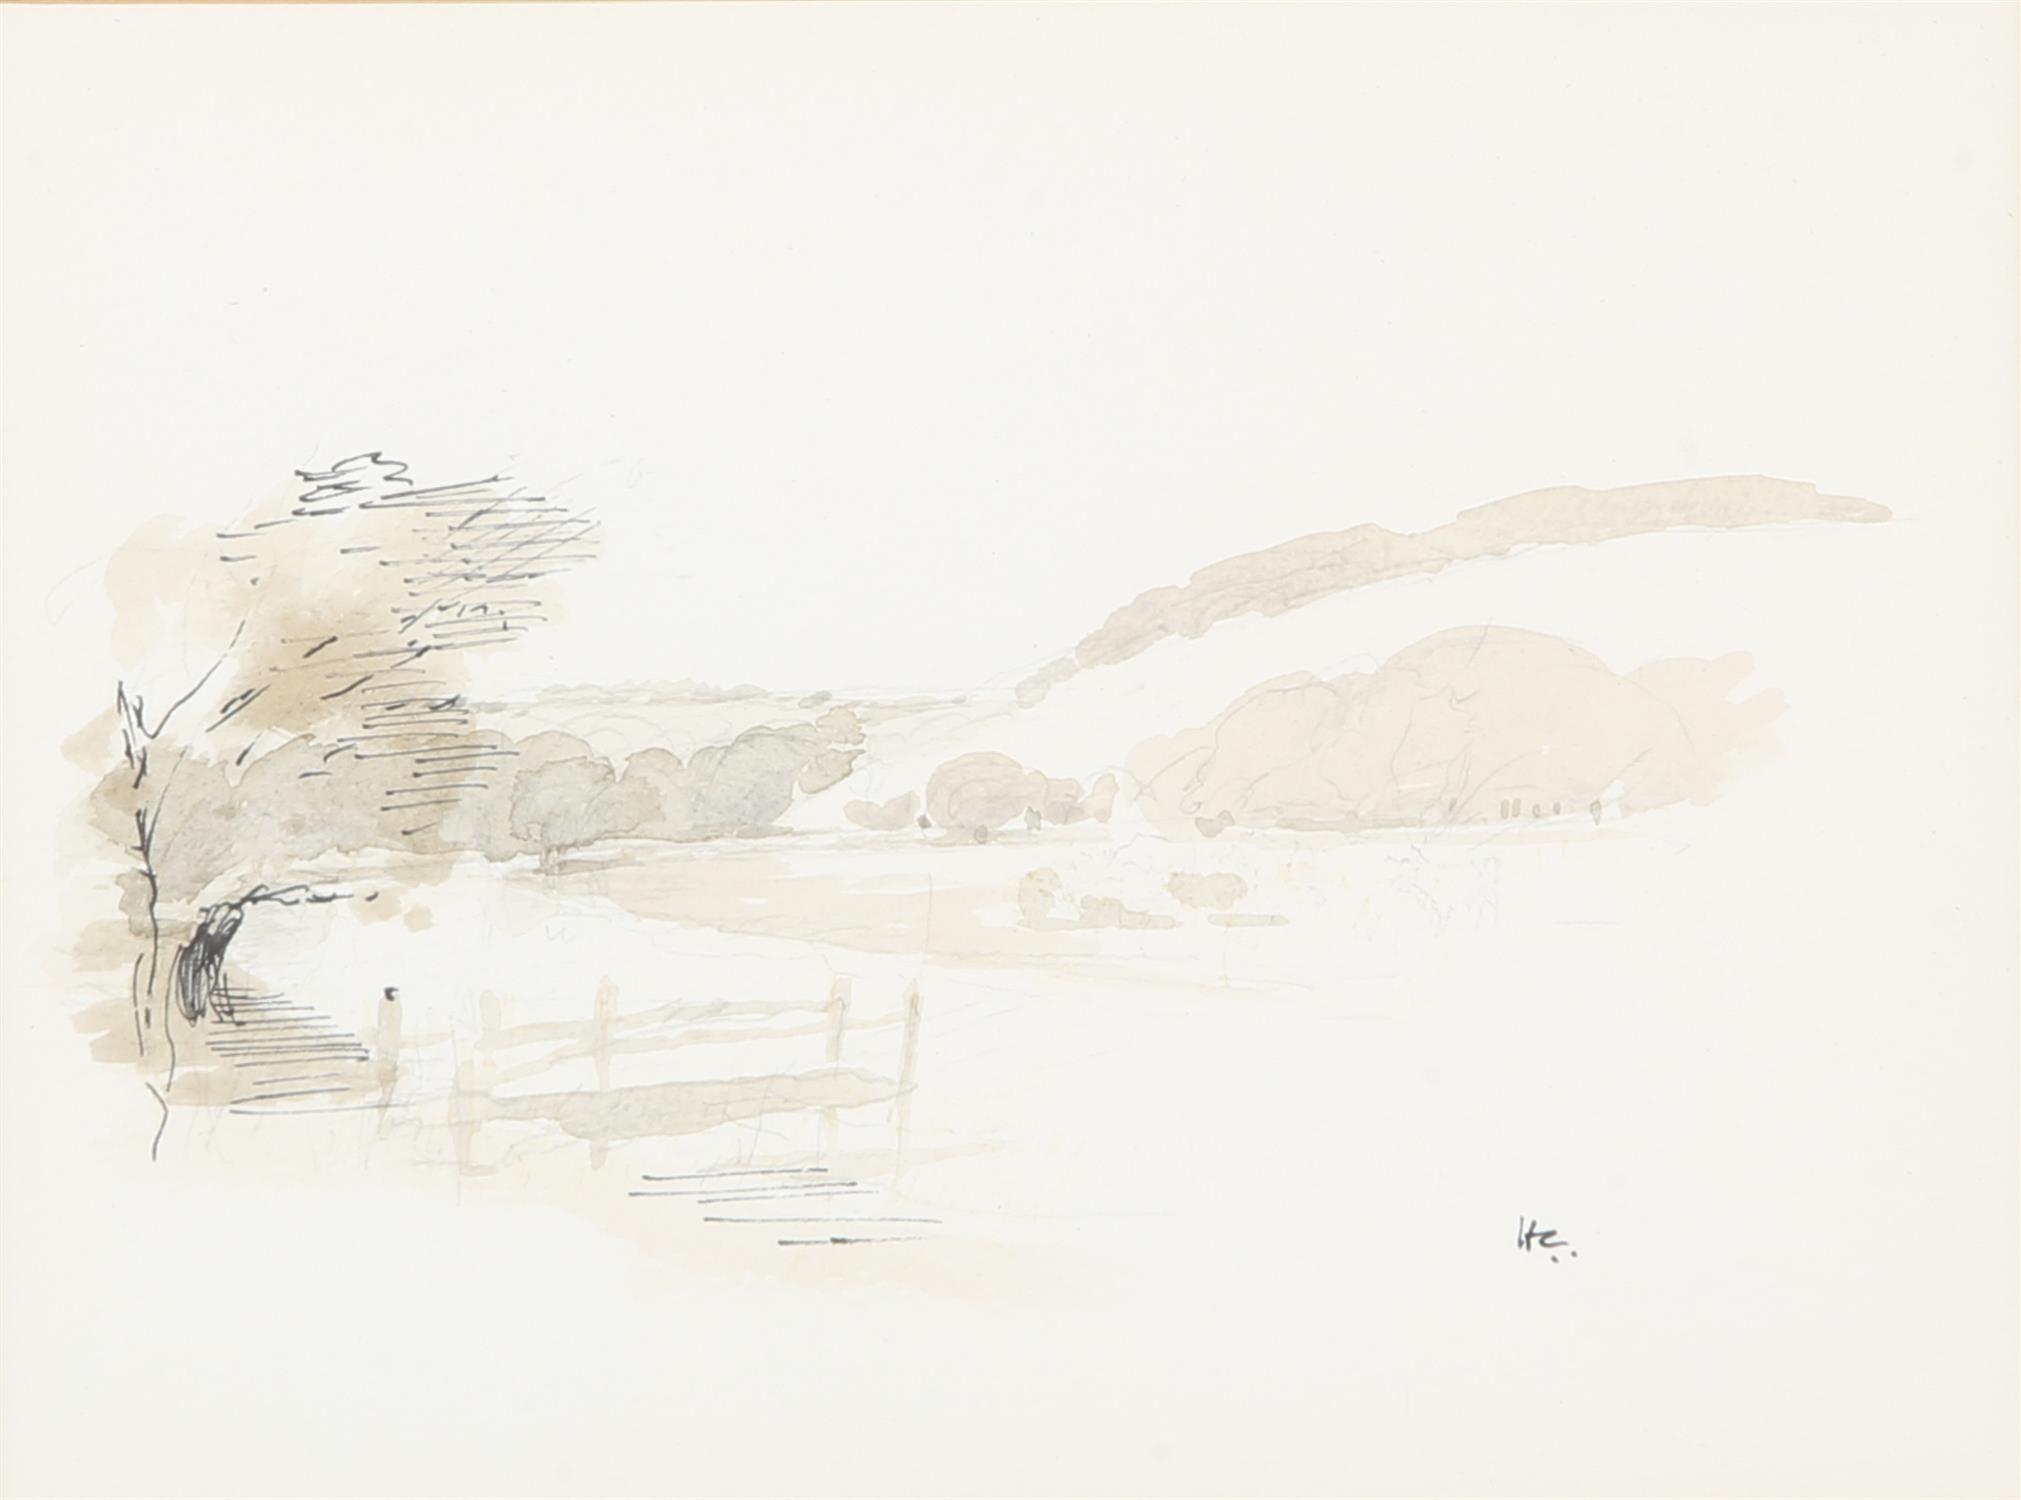 Hugh Casson (1910-1999), Lake Landscape, watercolour, pen and in, initialled lower right, 17 x 23cm.